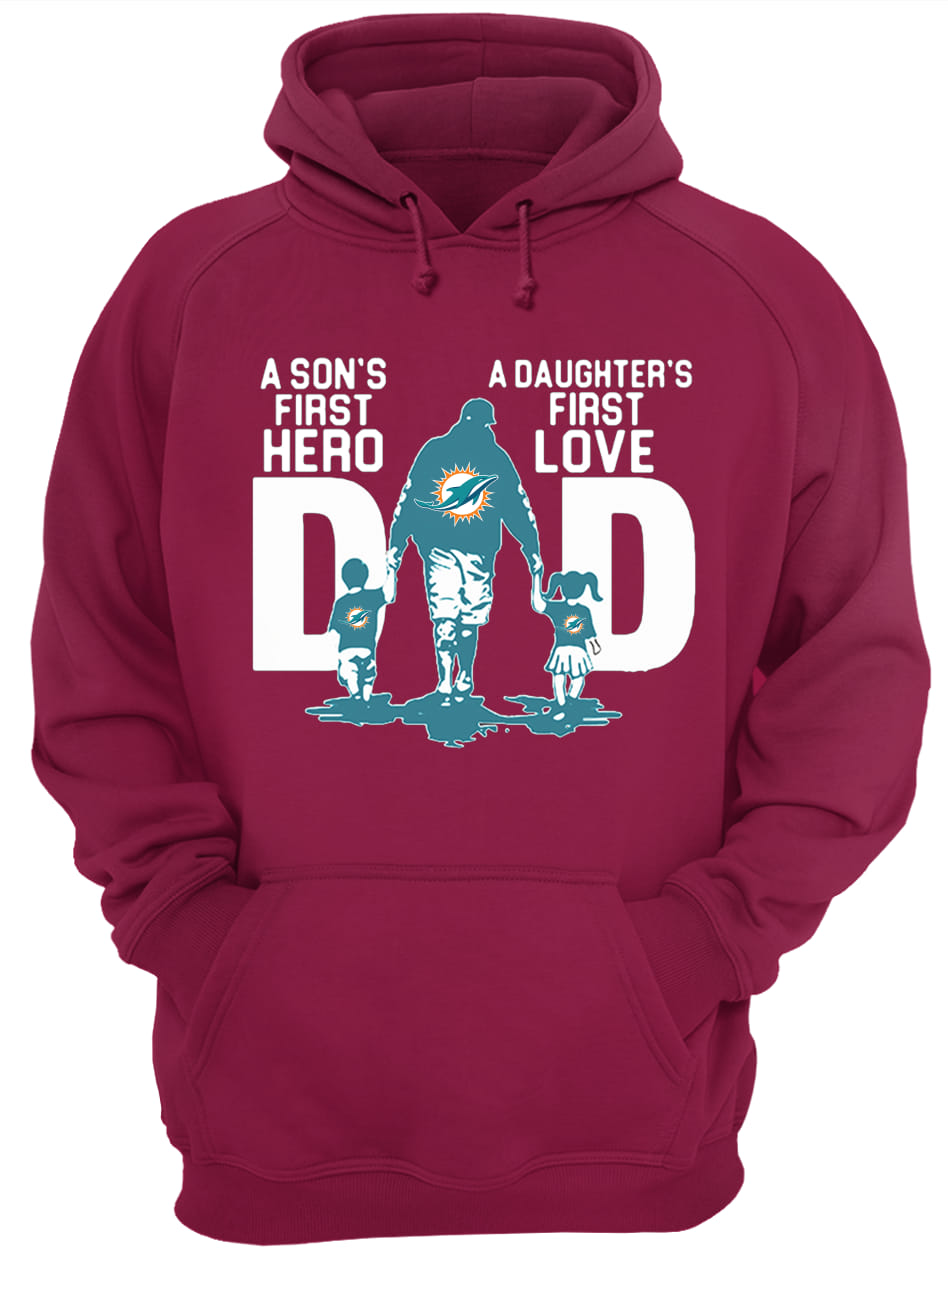 Miami dolphins dad a son's first hero a daughter's first love hoodie